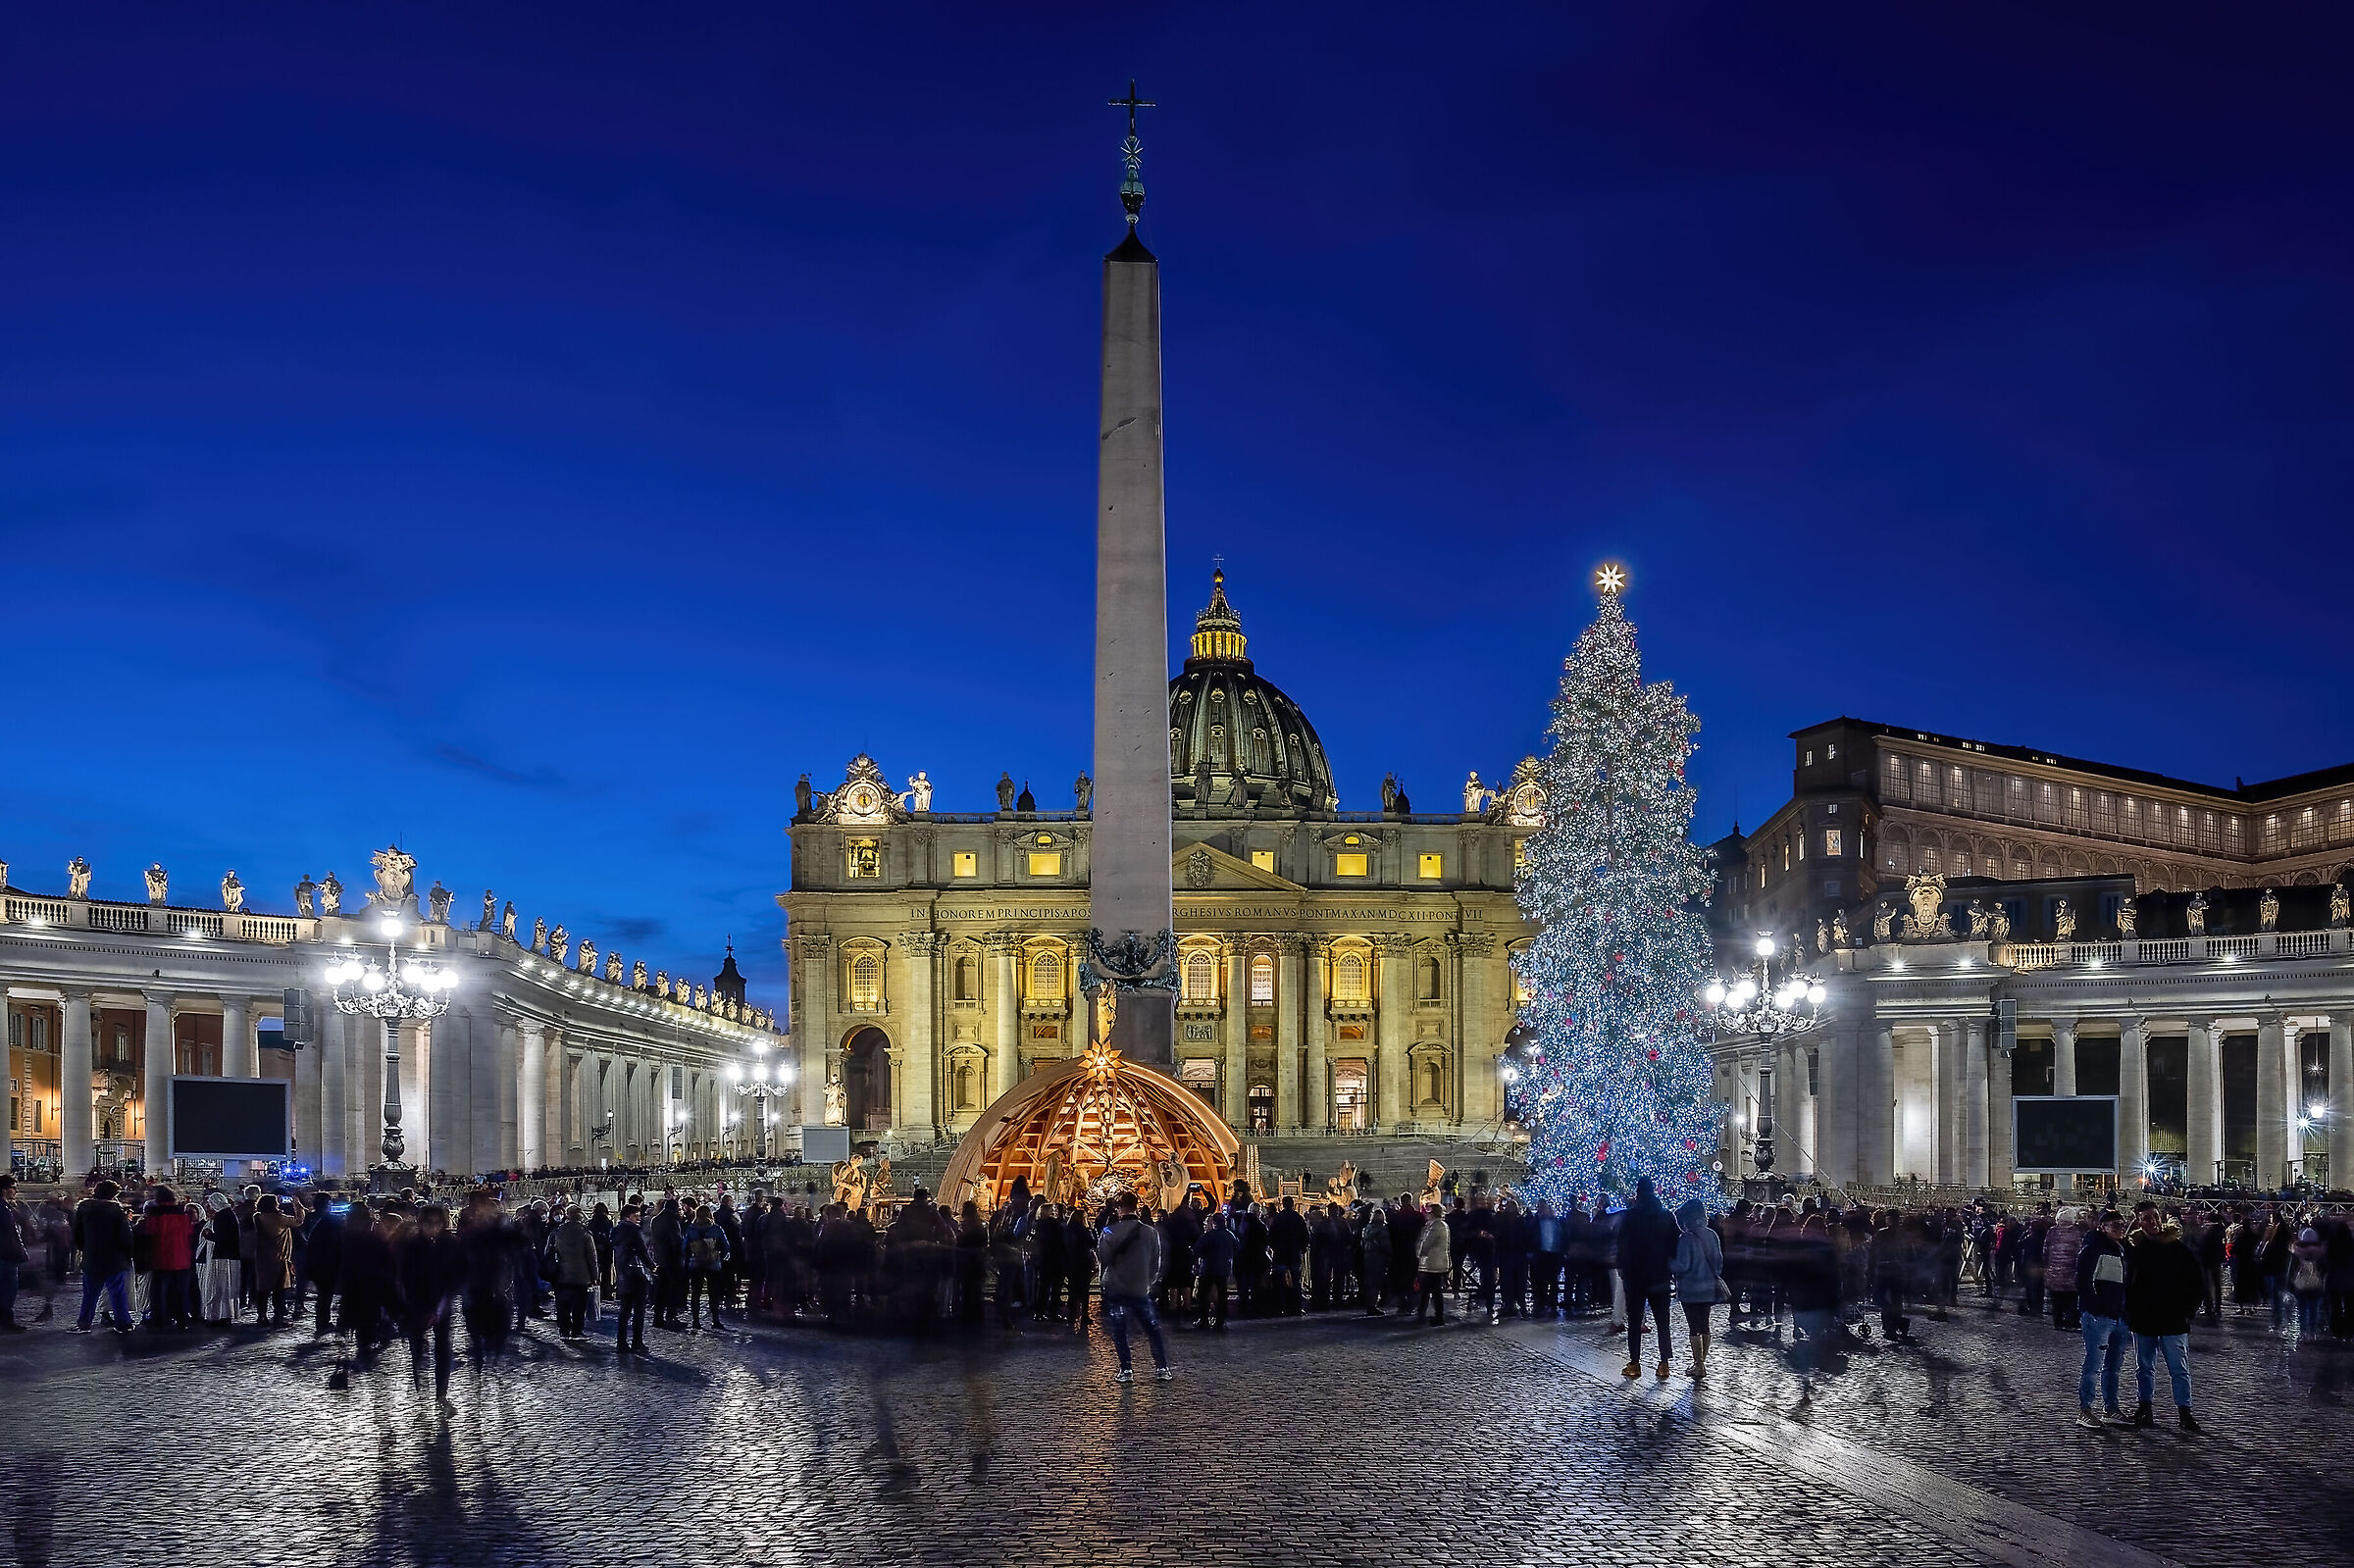 The magic of Christmas in St. Peter's ......